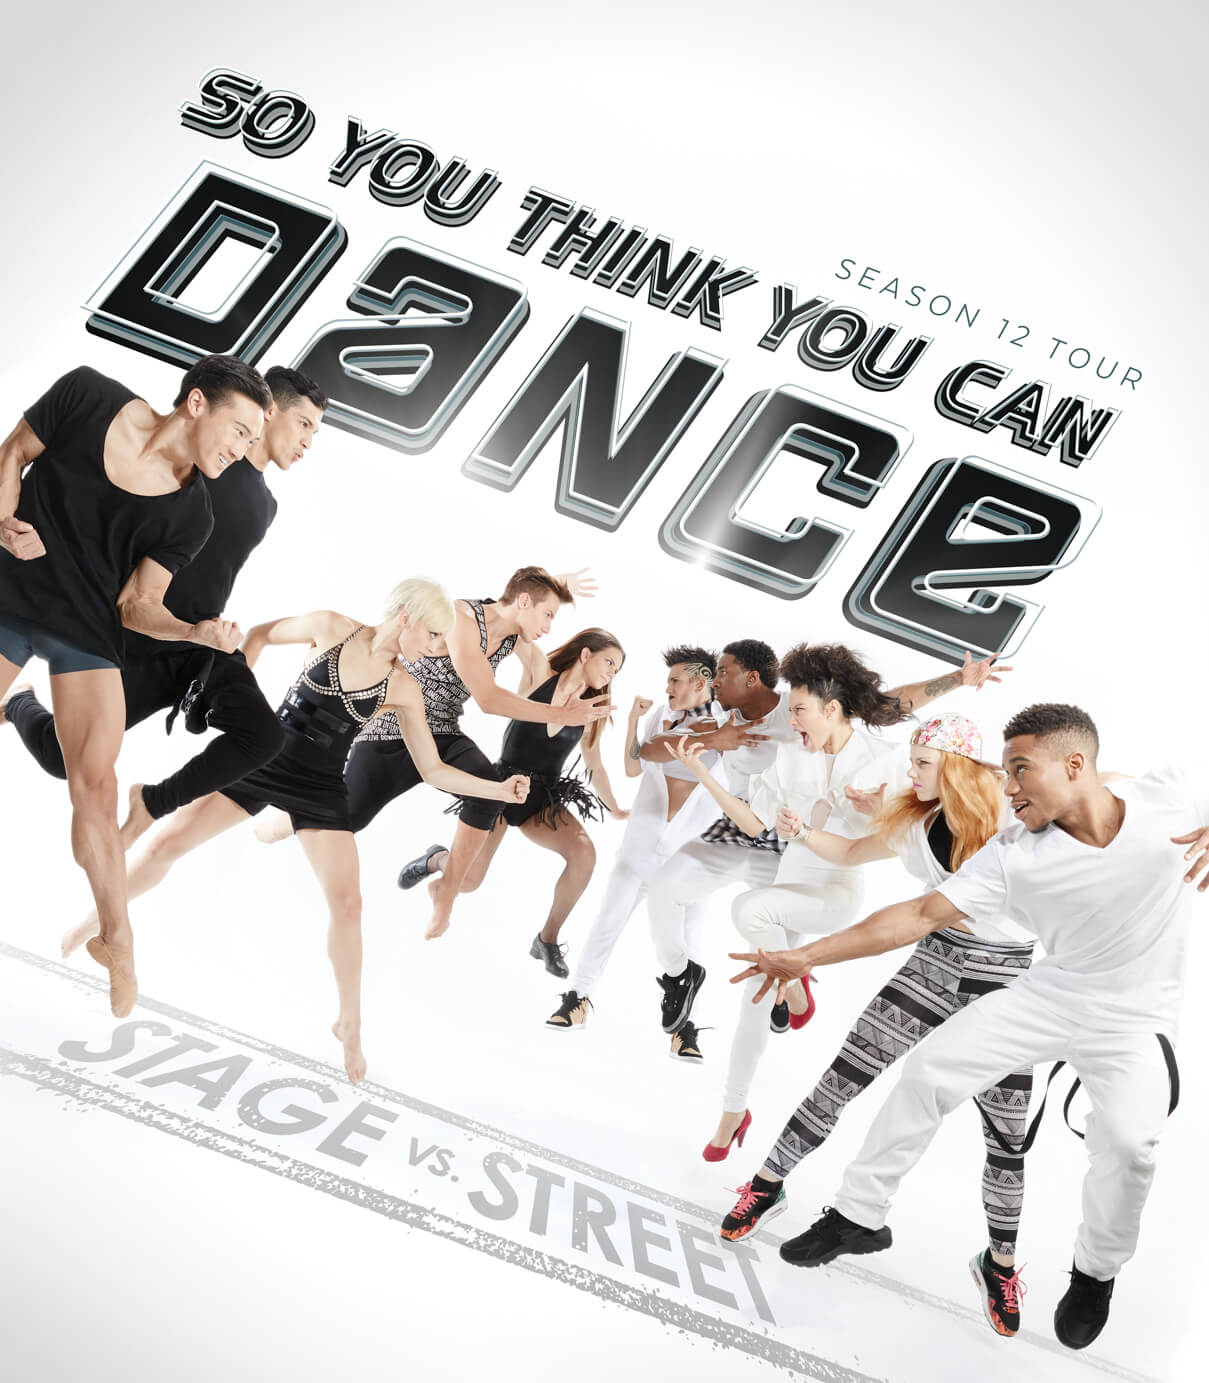 Back cover publication design in the 2015 tour book for Season 12 of So You Think You Can Dance TV program which aired on Fox